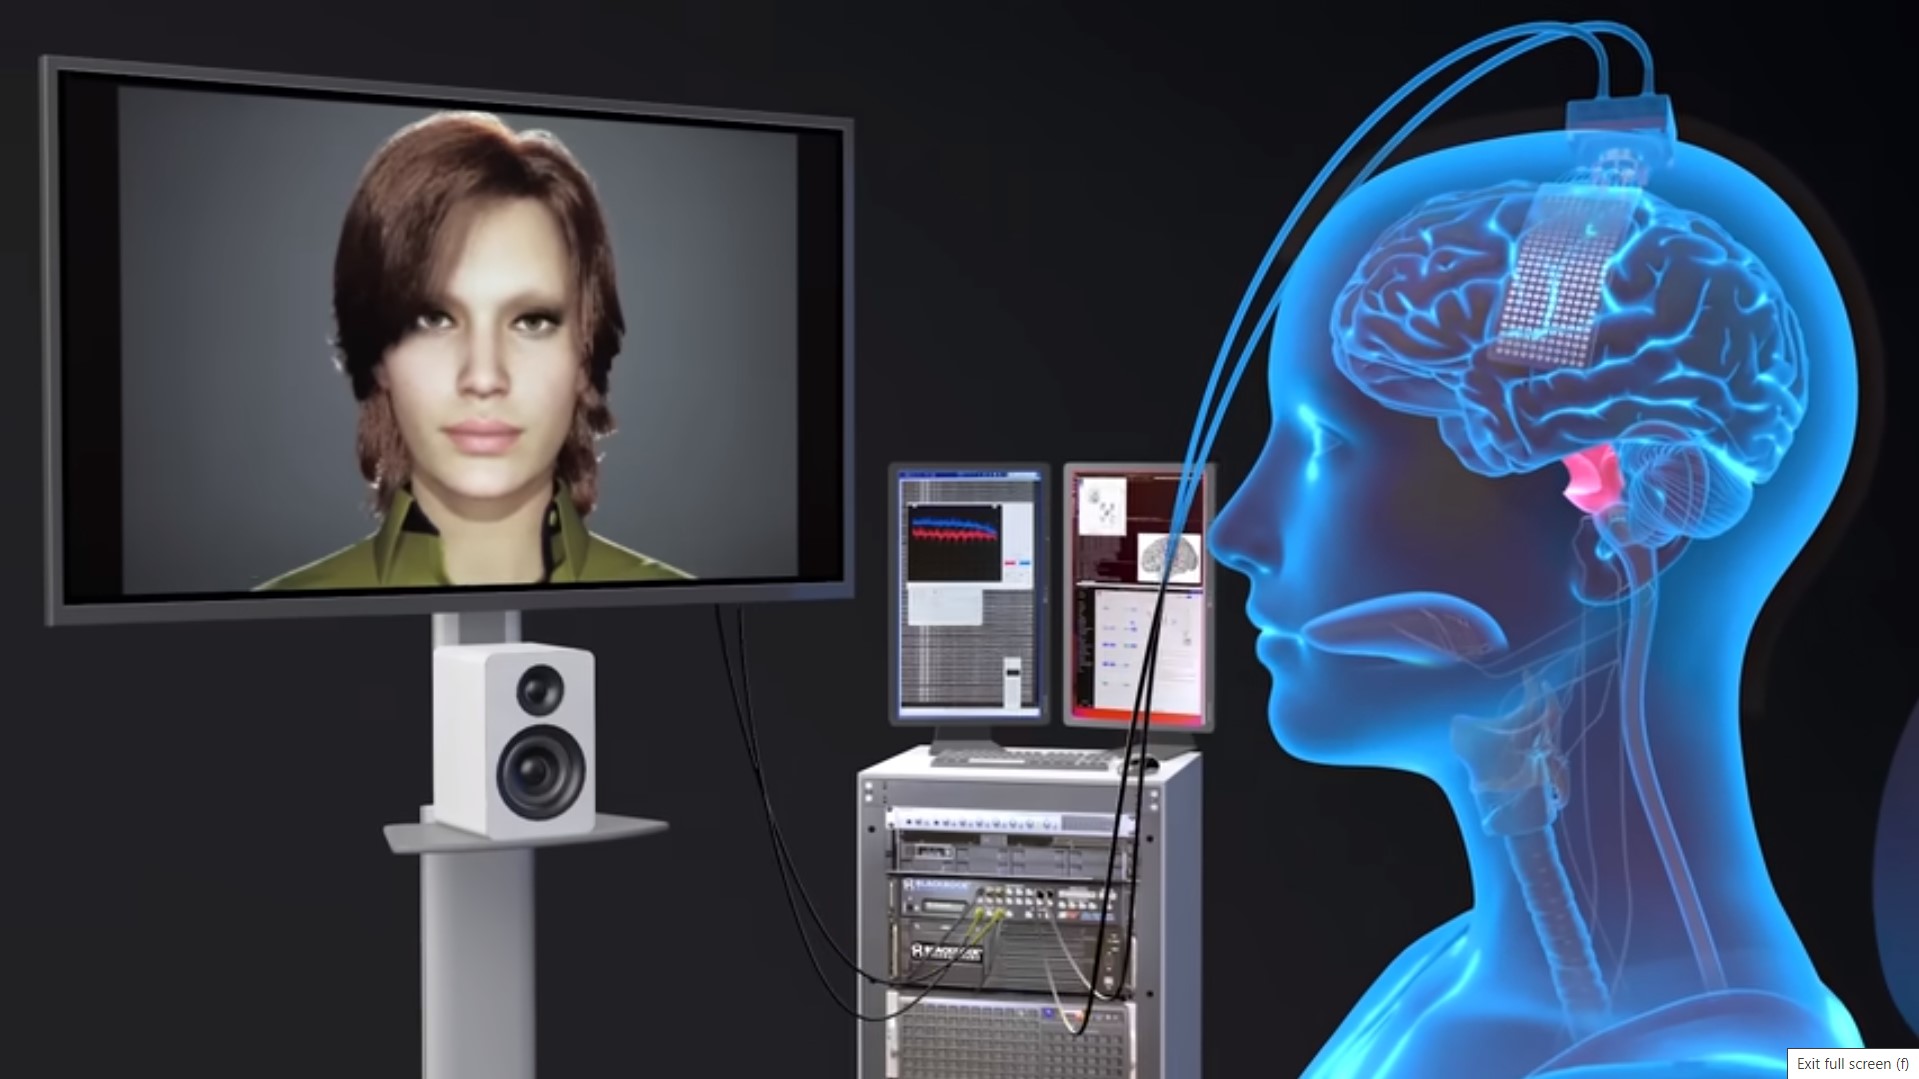 Researchers Harnessed Video Game Tech To Give Voice To A Woman Paralyzed By Stroke